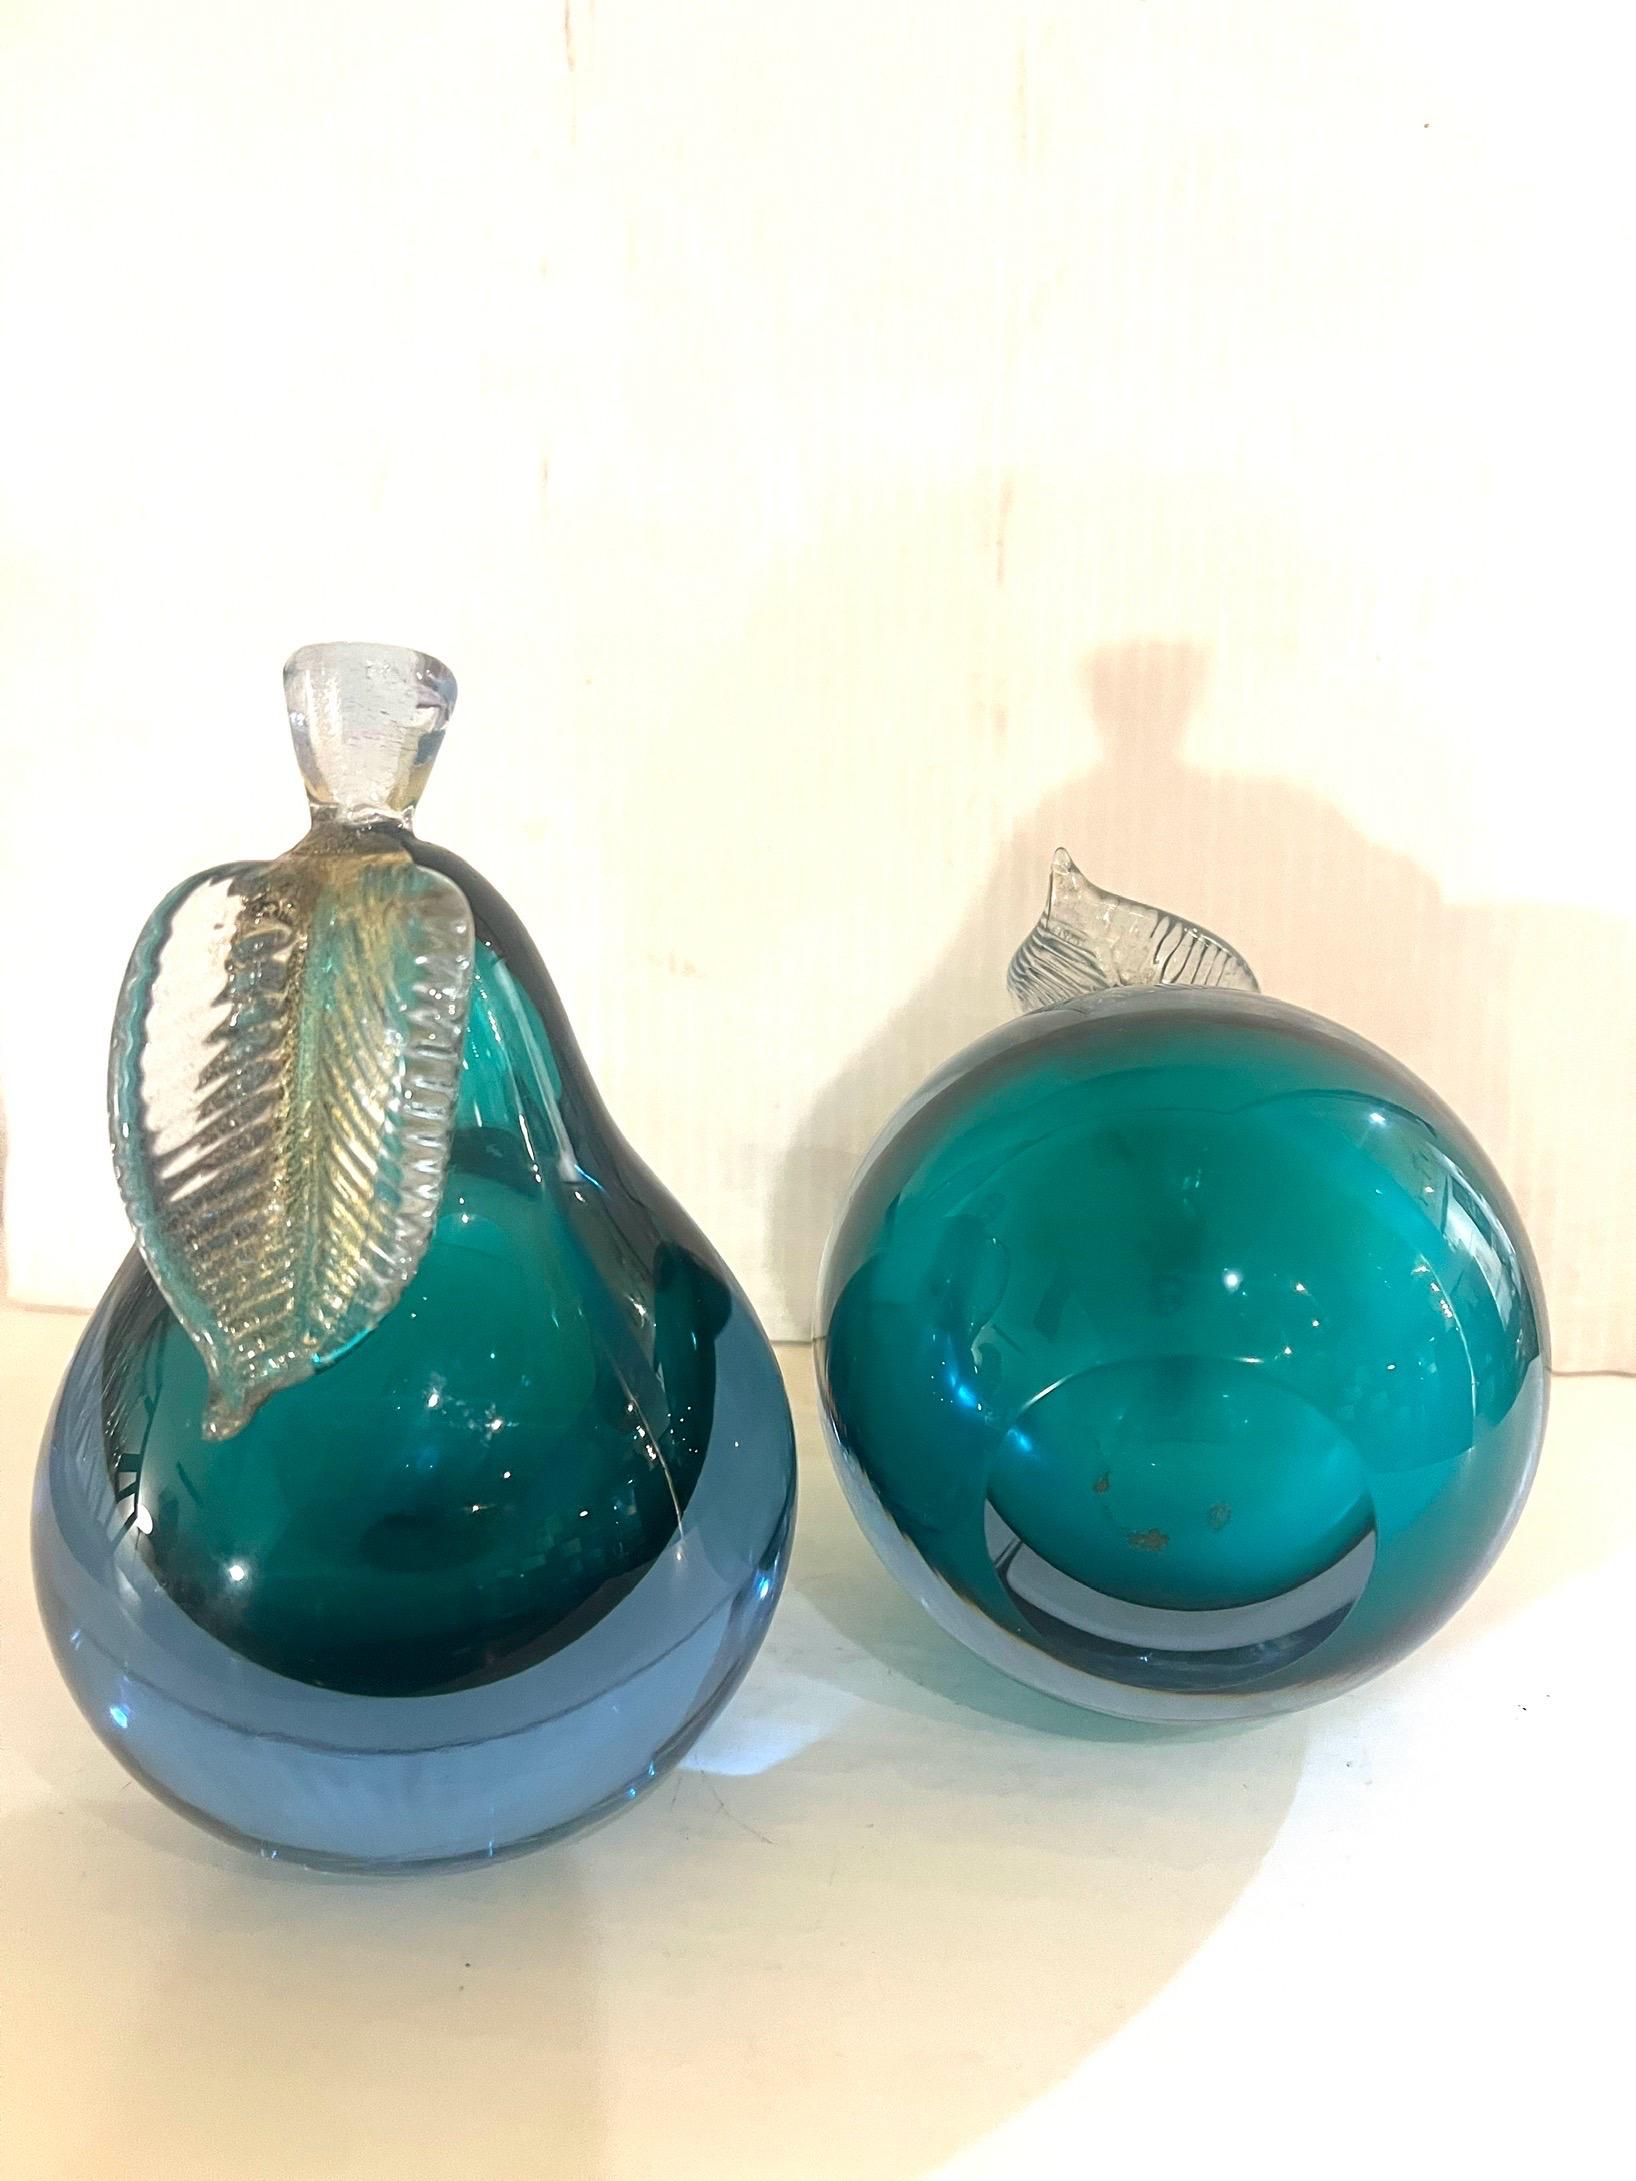 Mid-Century Modern Livio Seguso Venetian Murano Italy Art Glass Apple and Pear Bookends Sculptures For Sale